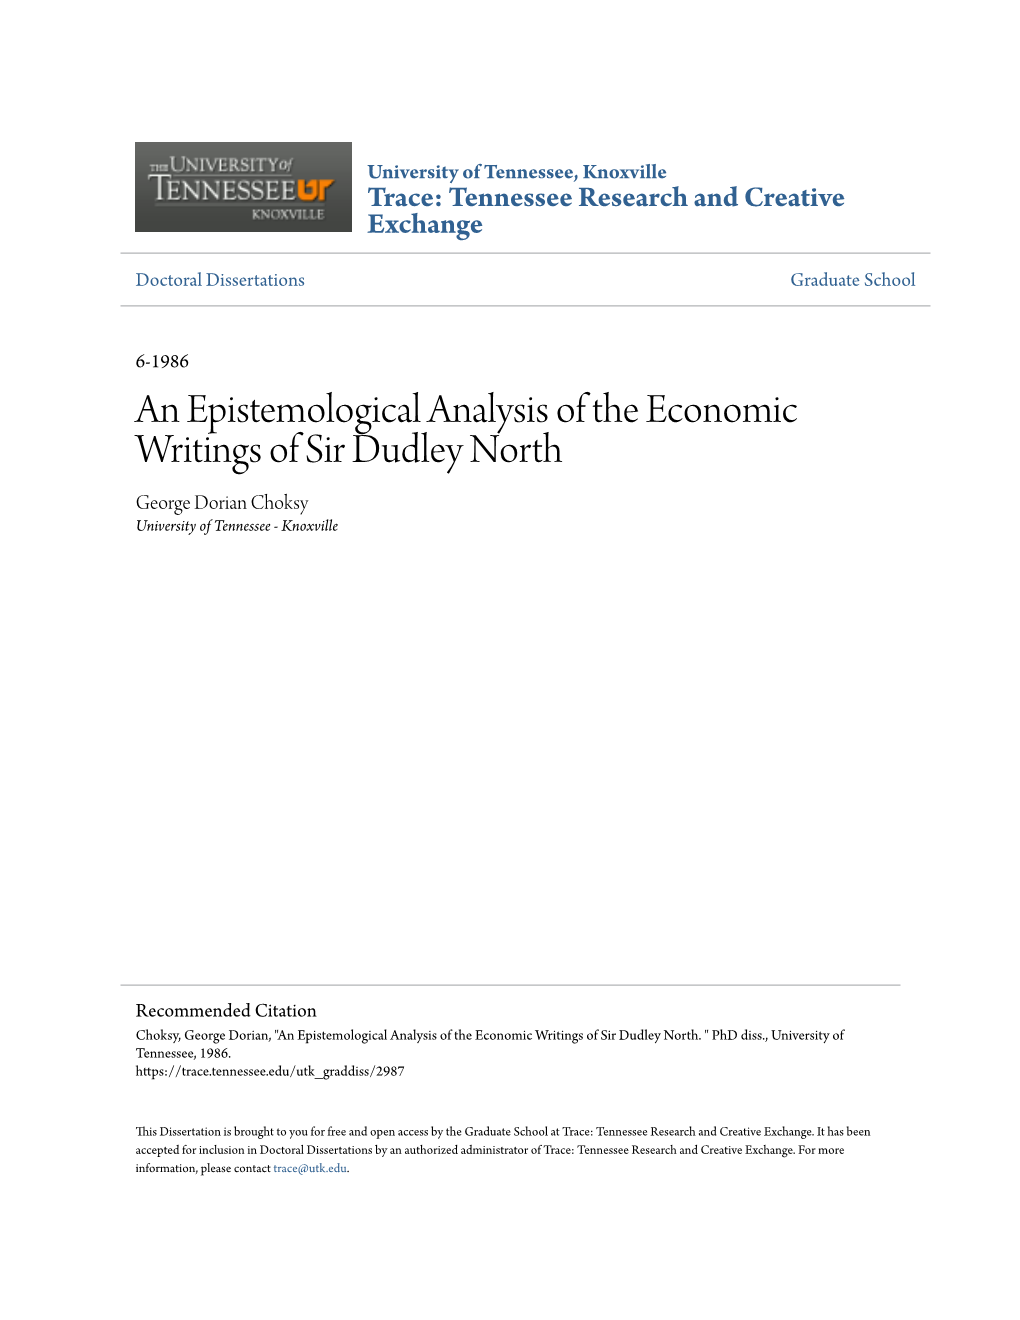 An Epistemological Analysis of the Economic Writings of Sir Dudley North George Dorian Choksy University of Tennessee - Knoxville